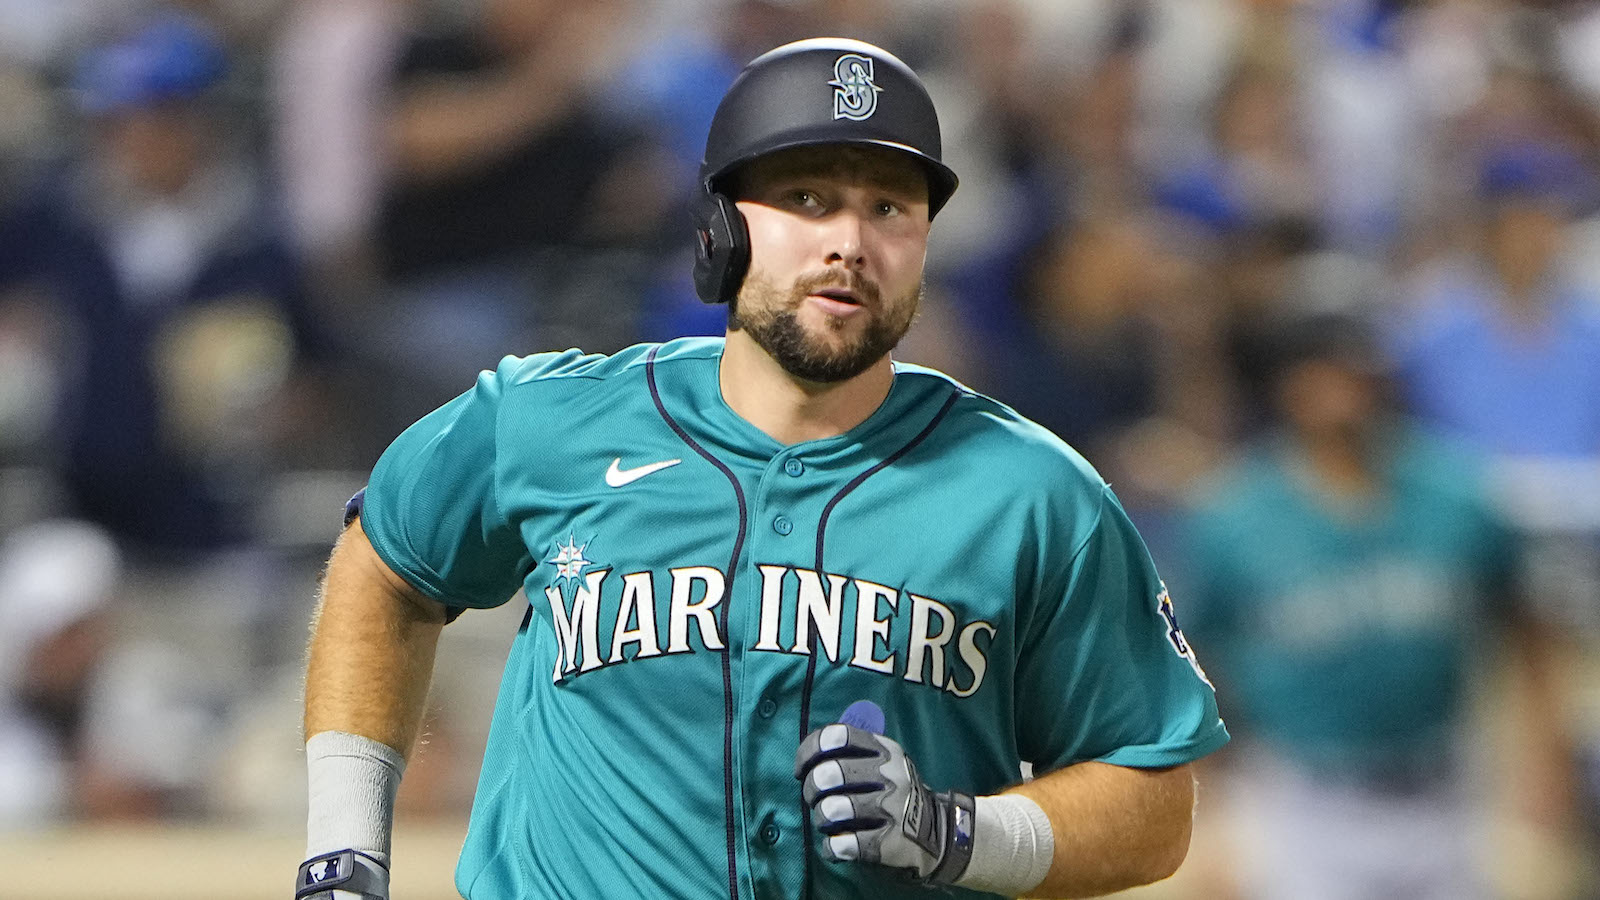 Mariners' Cal Raleigh apologizes for calling out team after season